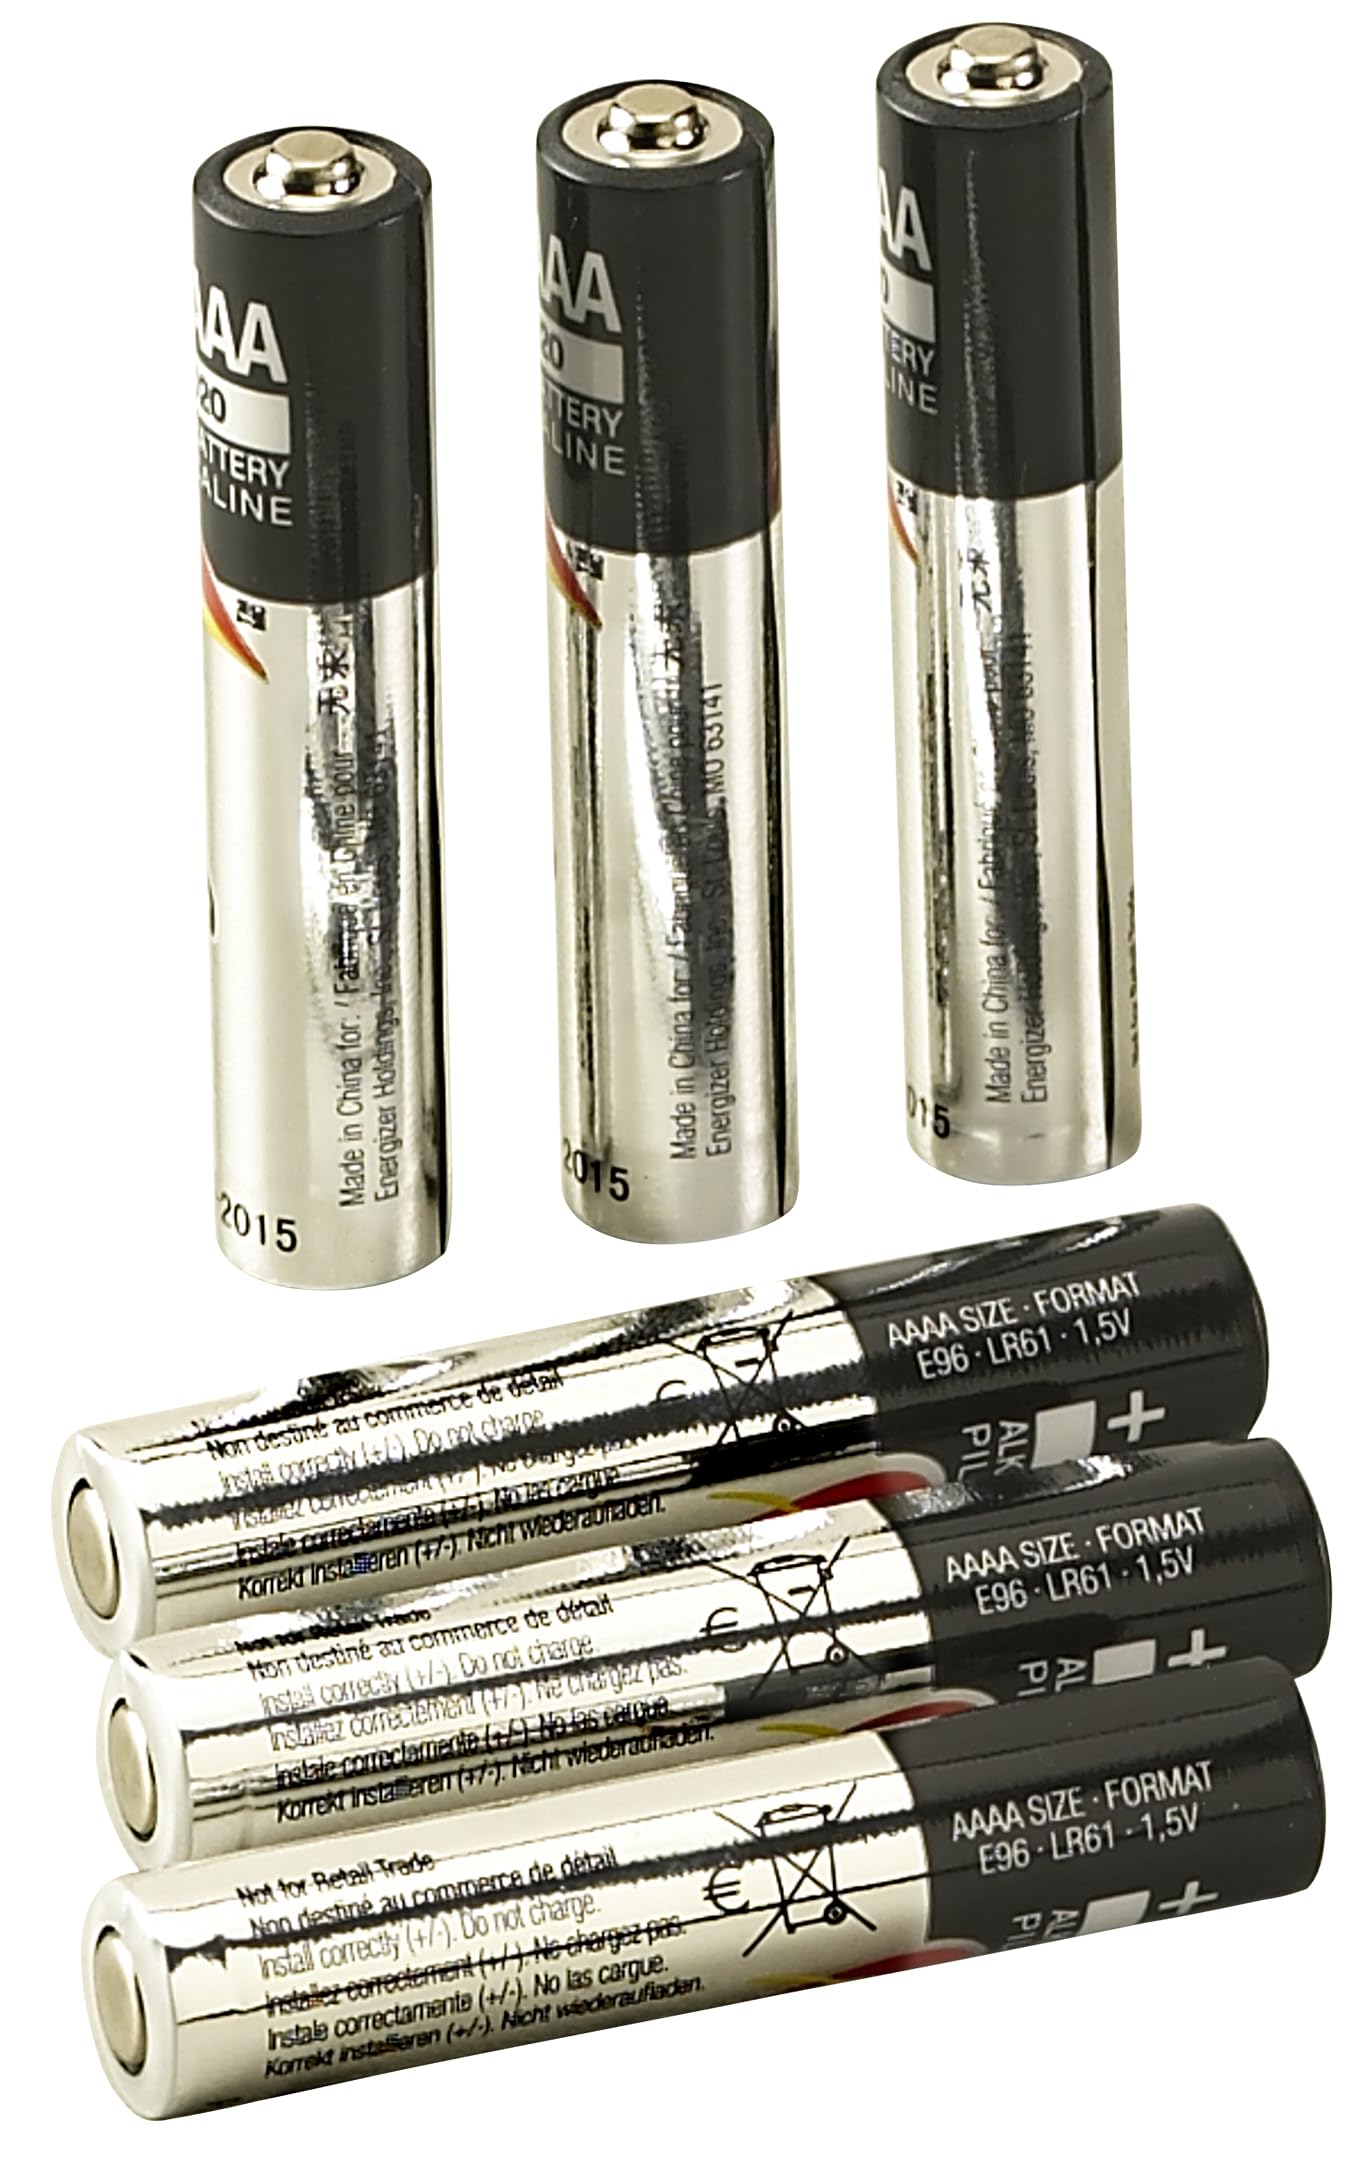 Streamlight 65030 Stylus AAAA Replacement Batteries, 6-Pack